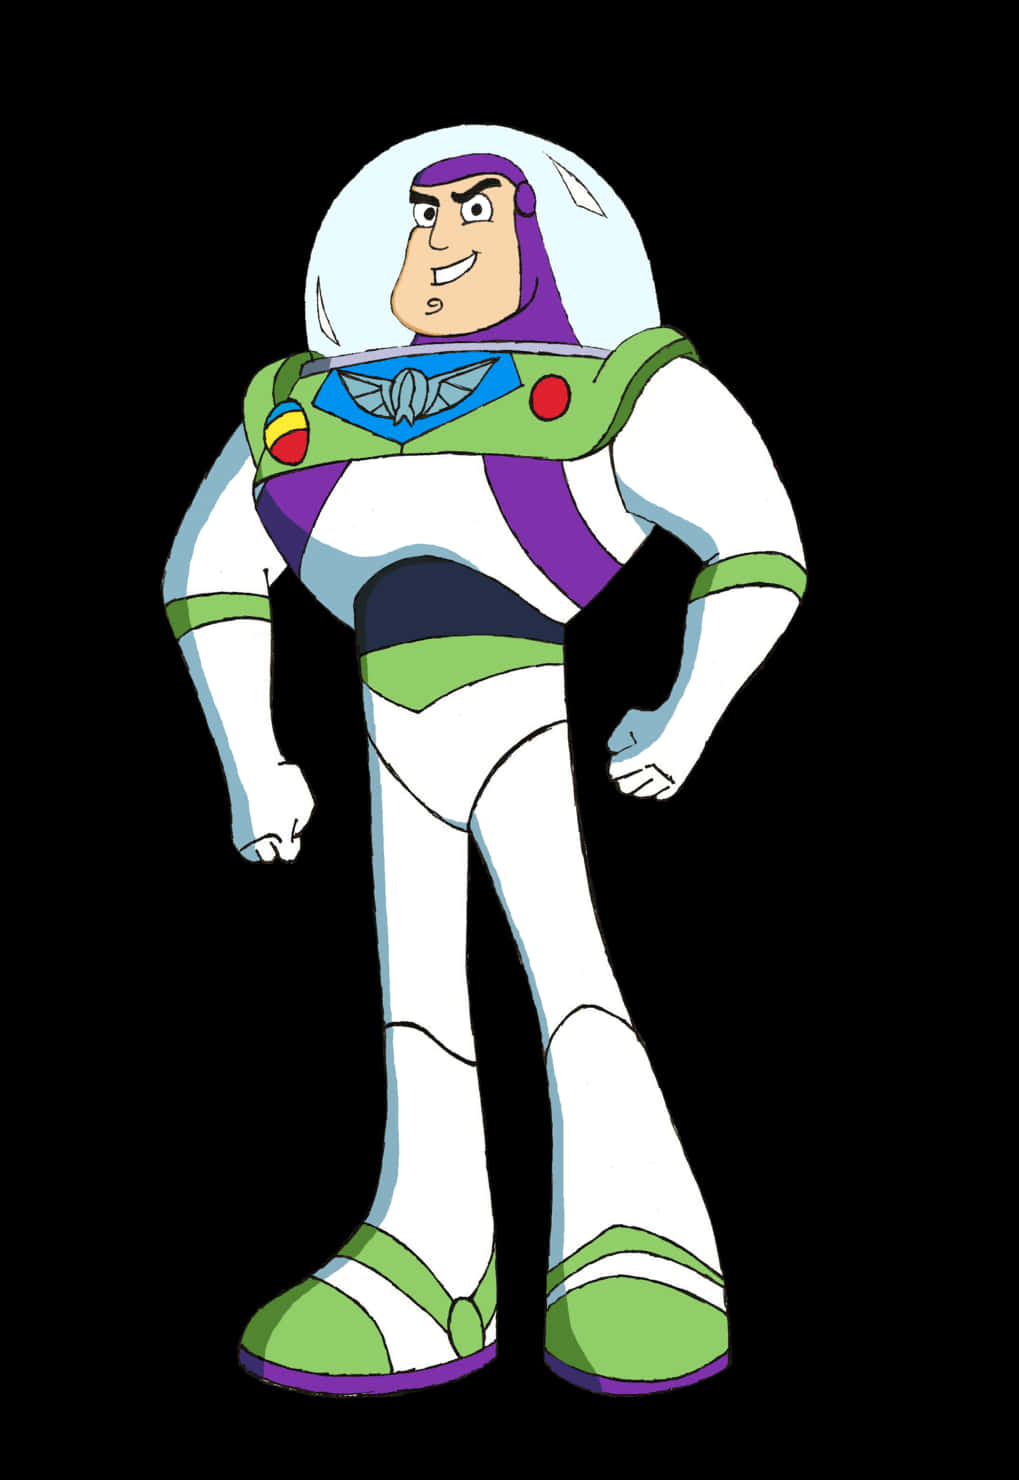 Cartoon Of A Man In A Space Suit